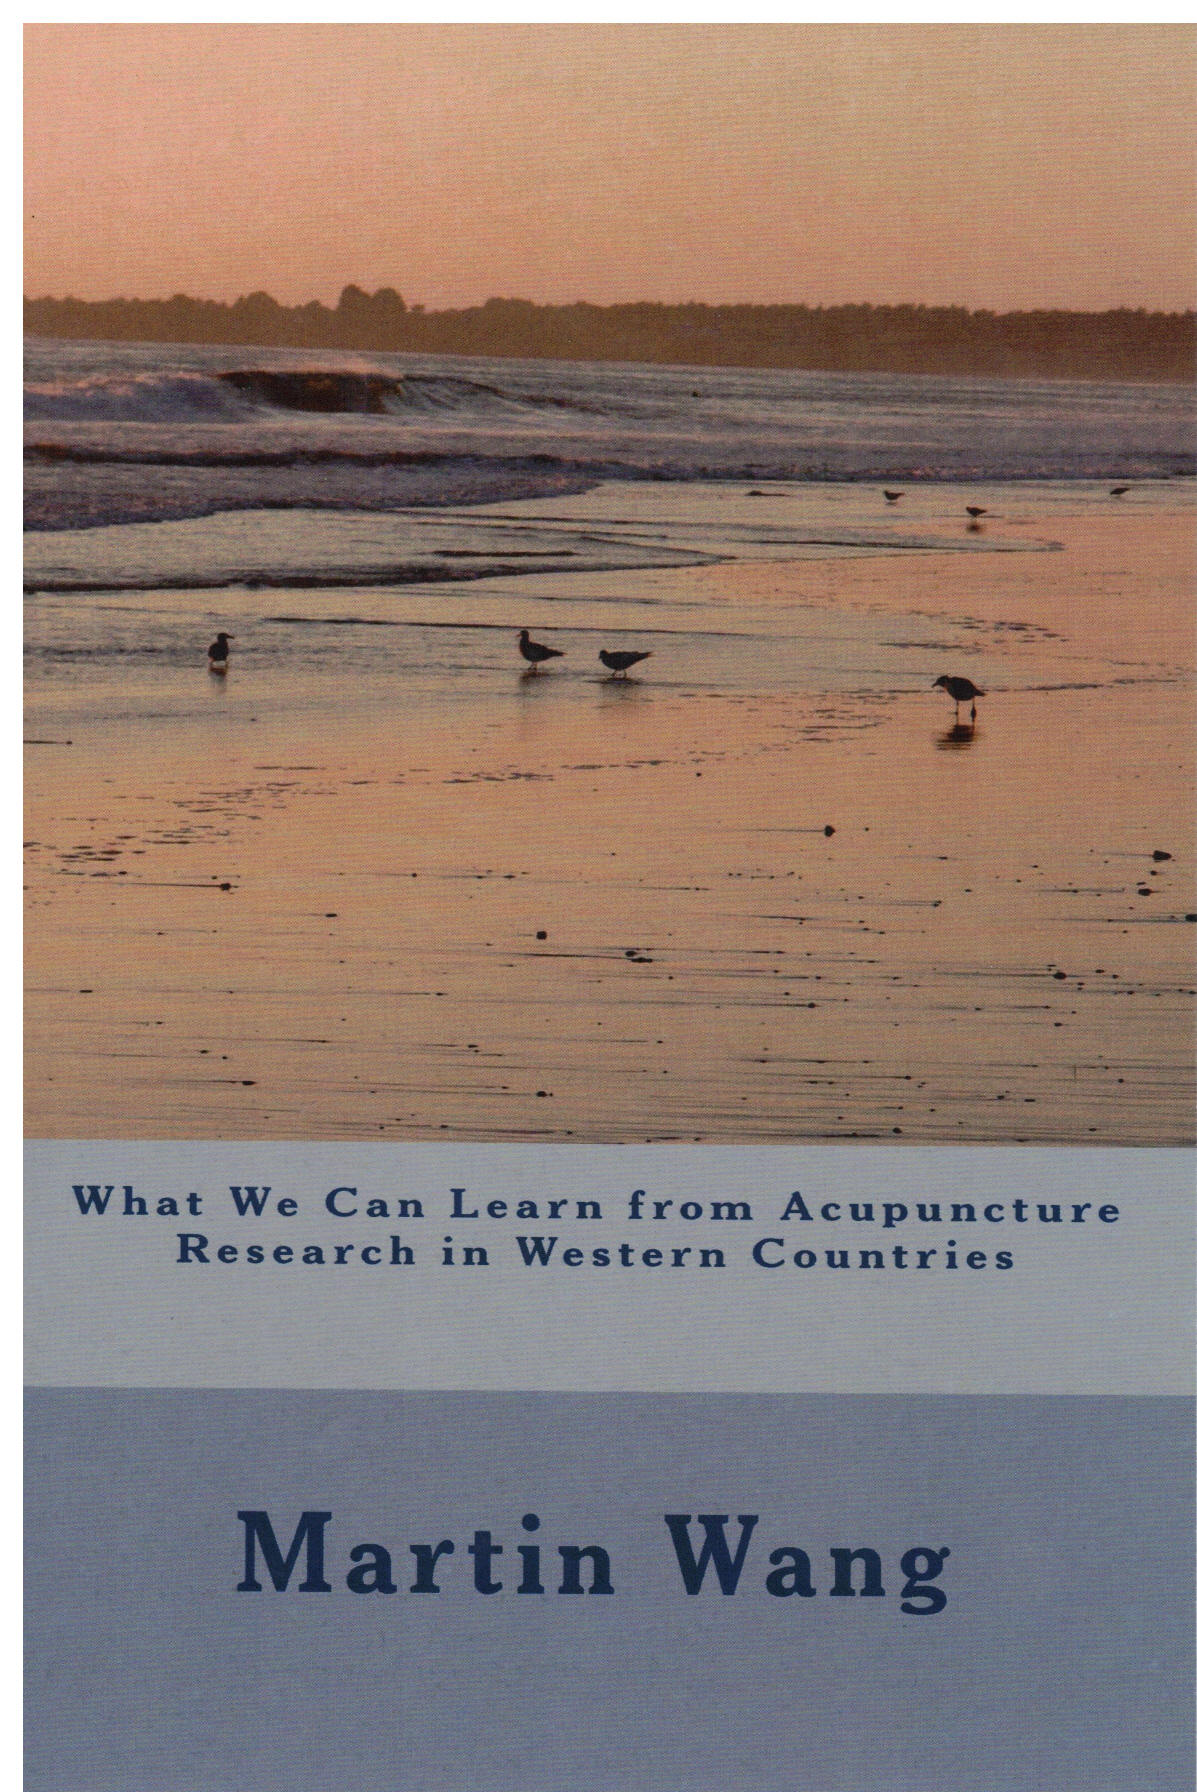 book 4a. What we can learn